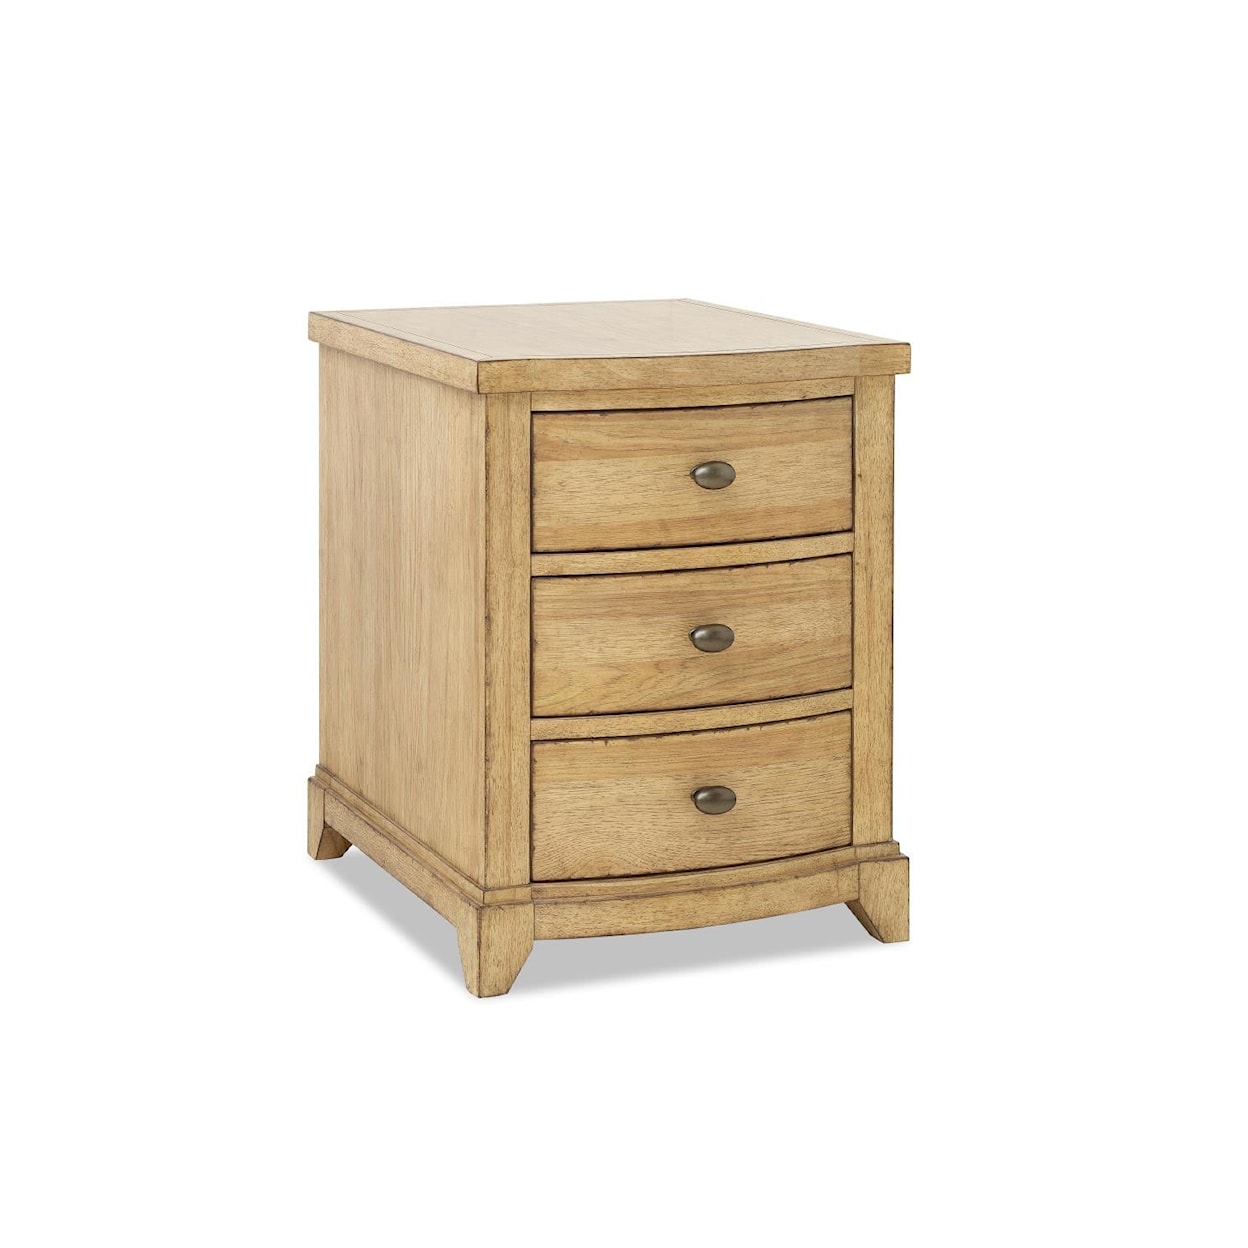 Trisha Yearwood Home Collection by Legacy Classic Today's Traditions Chairside Chest